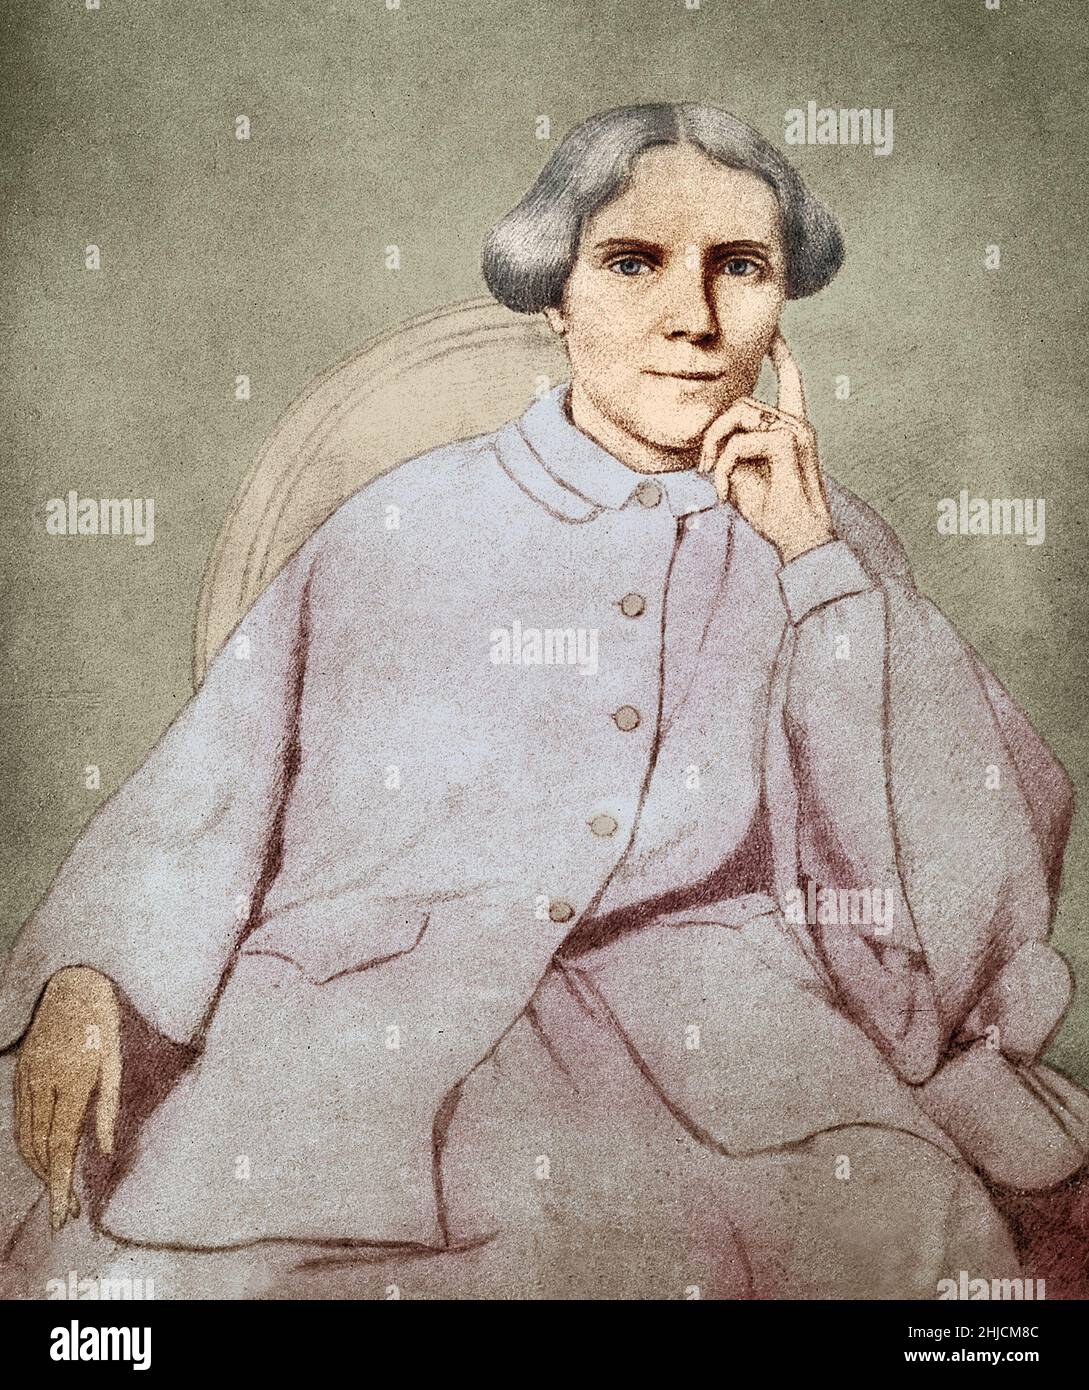 Colorized illustration of British physician Elizabeth Blackwell (3 February 1821 - 31 May 1910), most noteworthy for being the first woman to receive a medical degree in the United States. After a print made from a sketch by the Countess de Charnaccee, 1859. Stock Photo